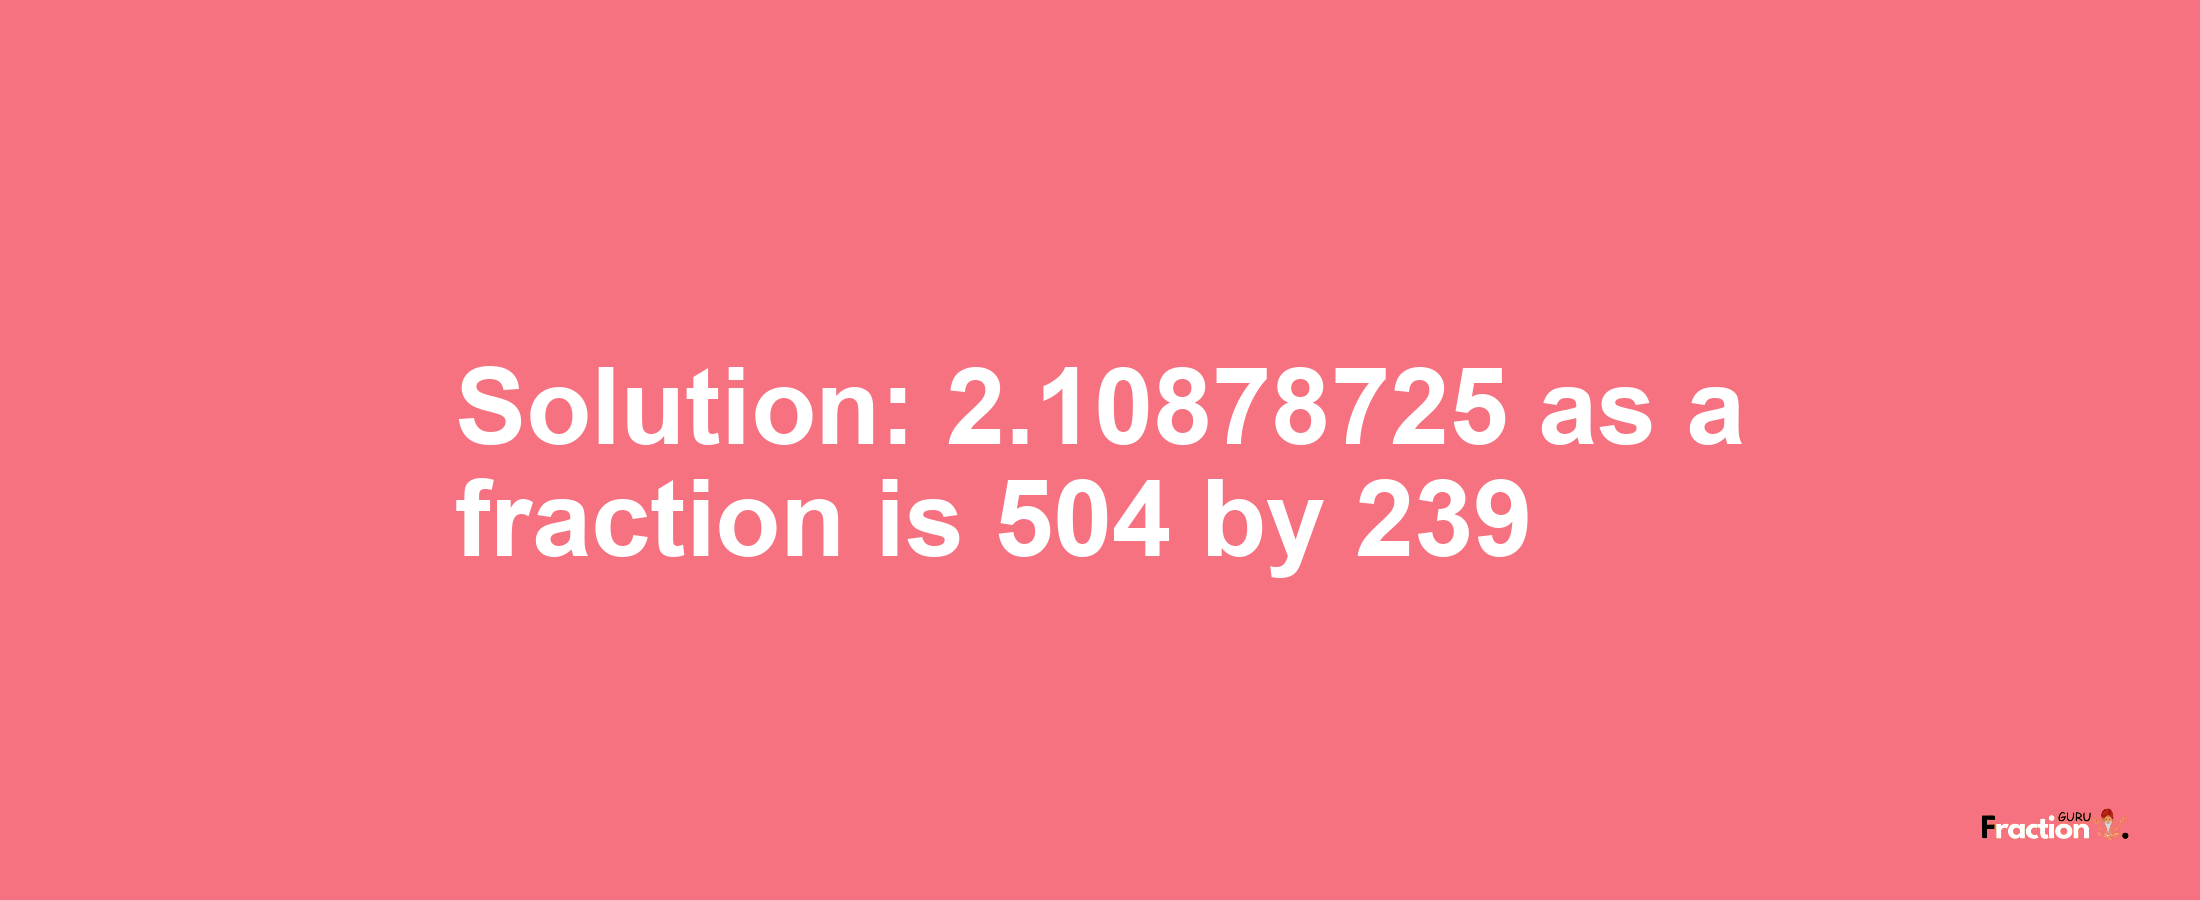 Solution:2.10878725 as a fraction is 504/239